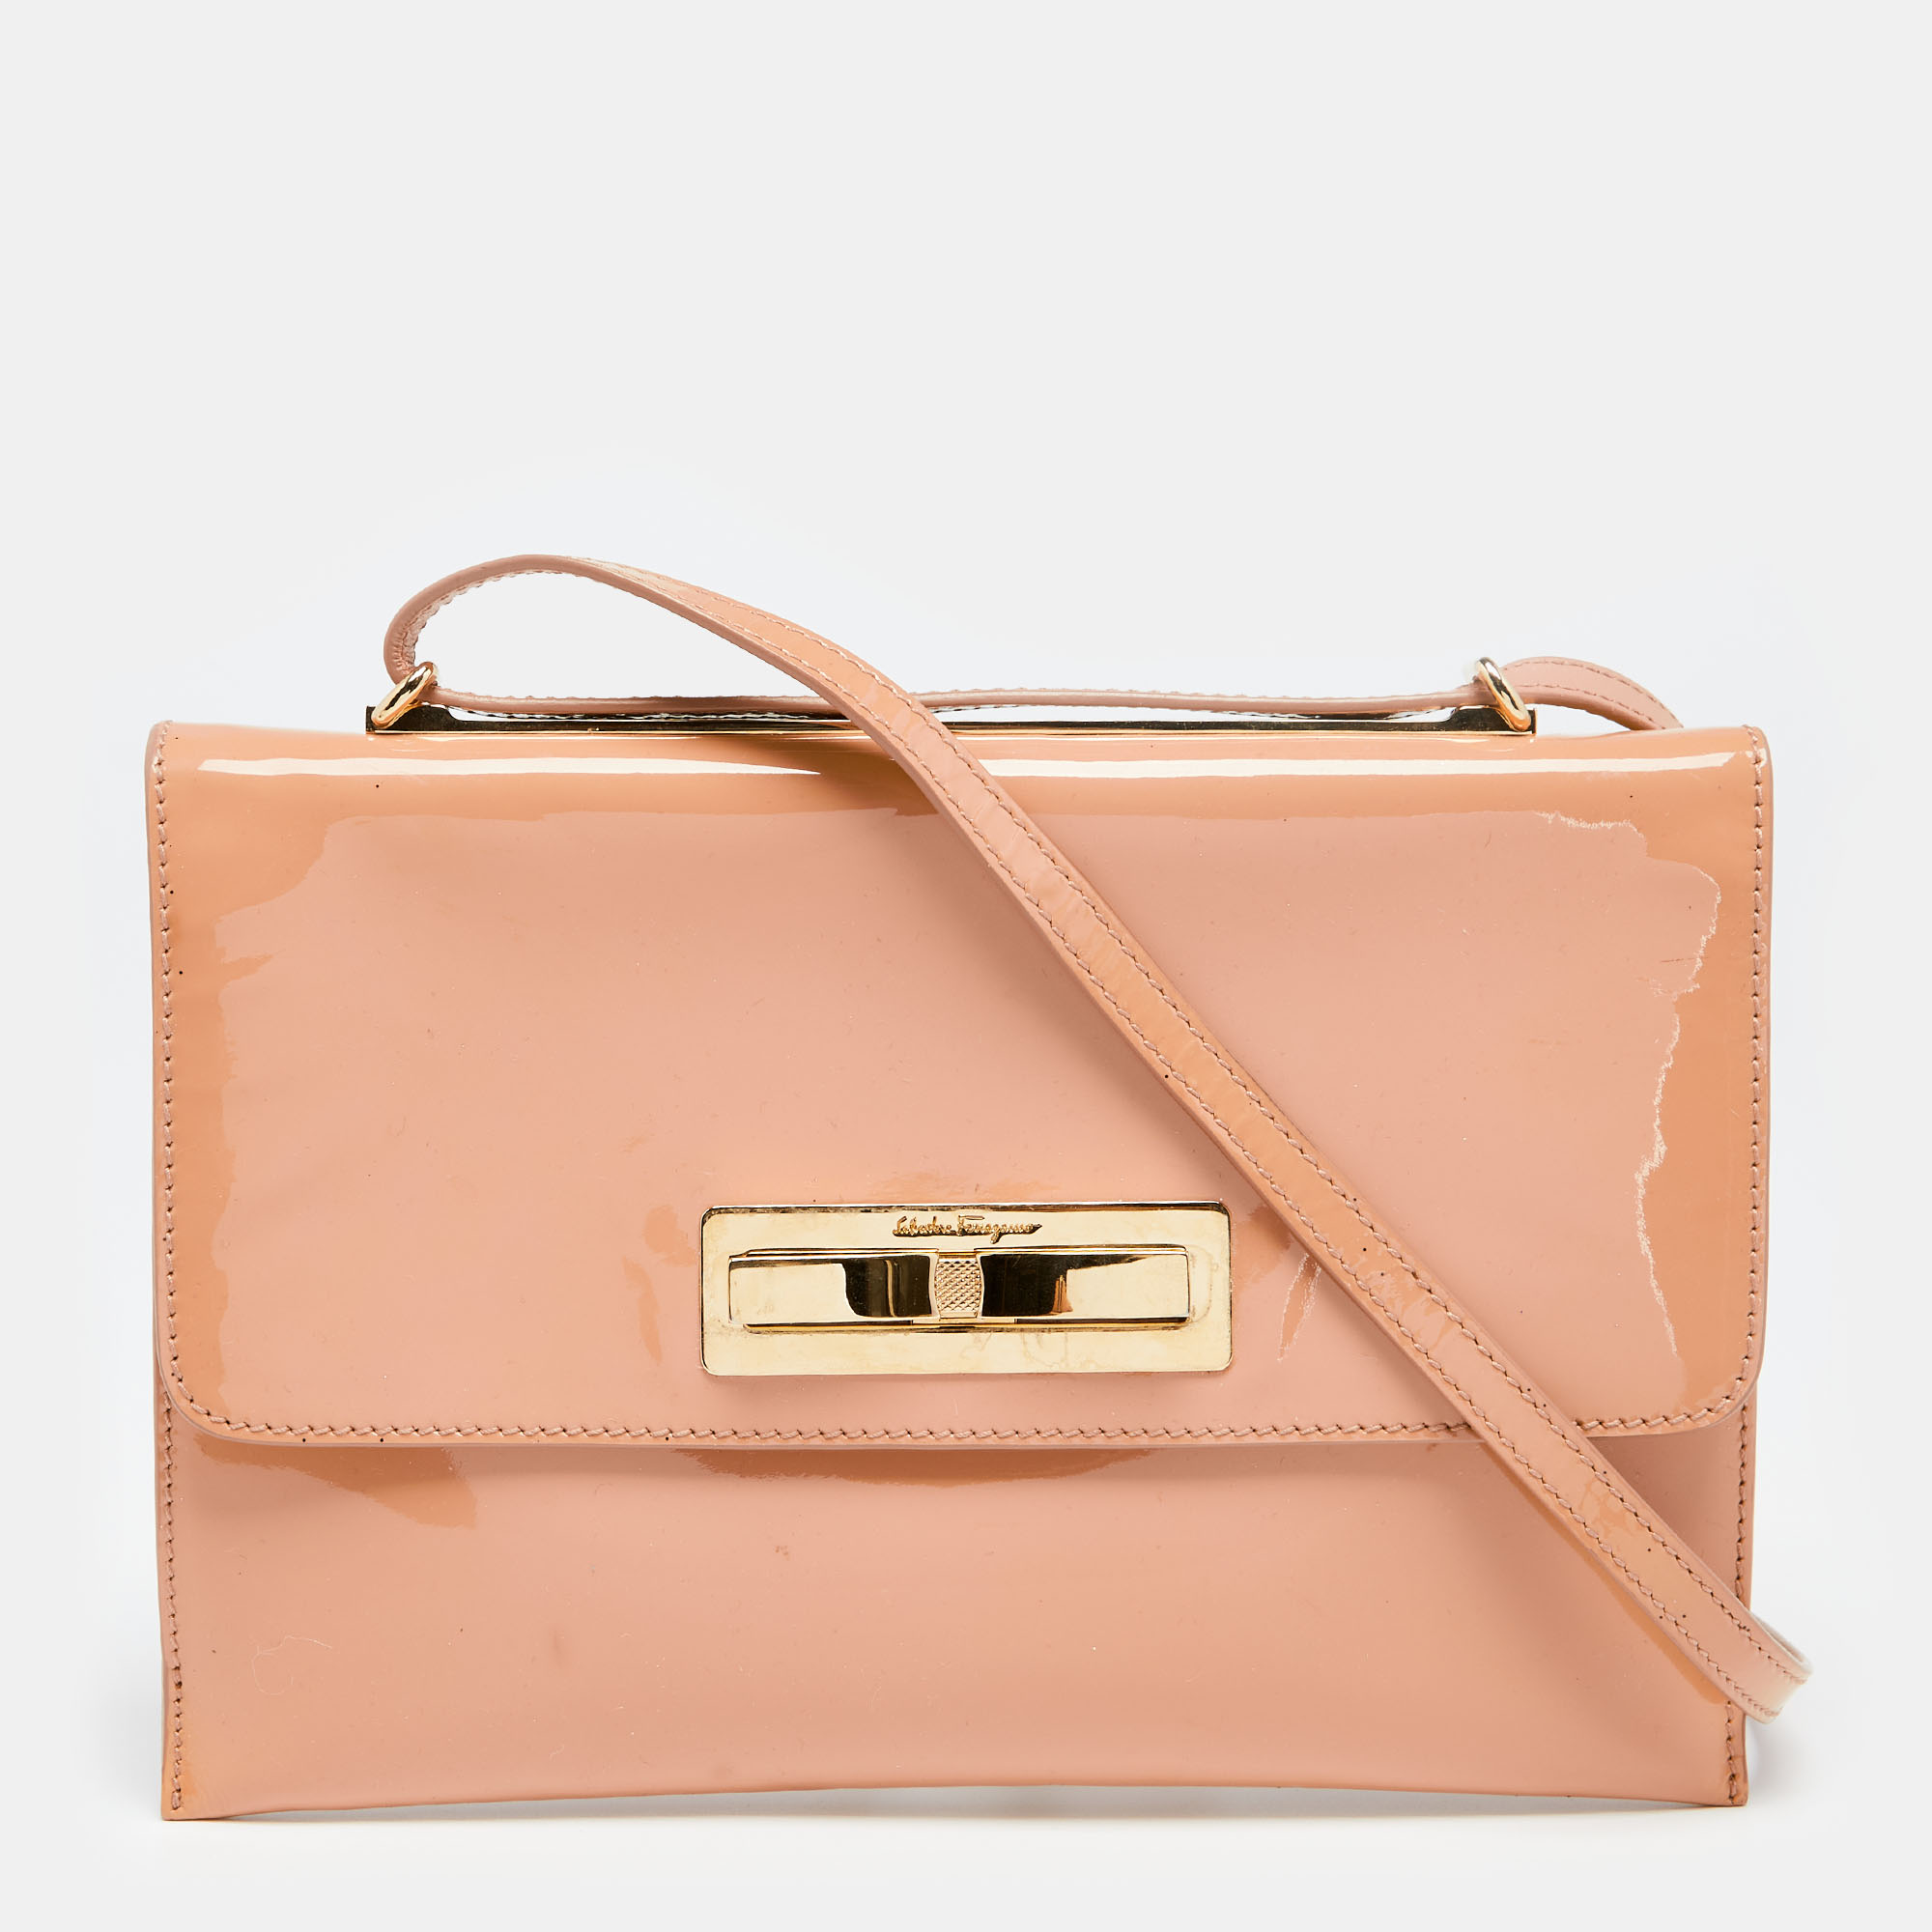 This designer shoulder bag from Salvatore Ferragamo is crafted from peach patent leather. The bag features a bow detailed flap closure a shoulder strap and a leather lined interior. This creation is easy to carry on any day.